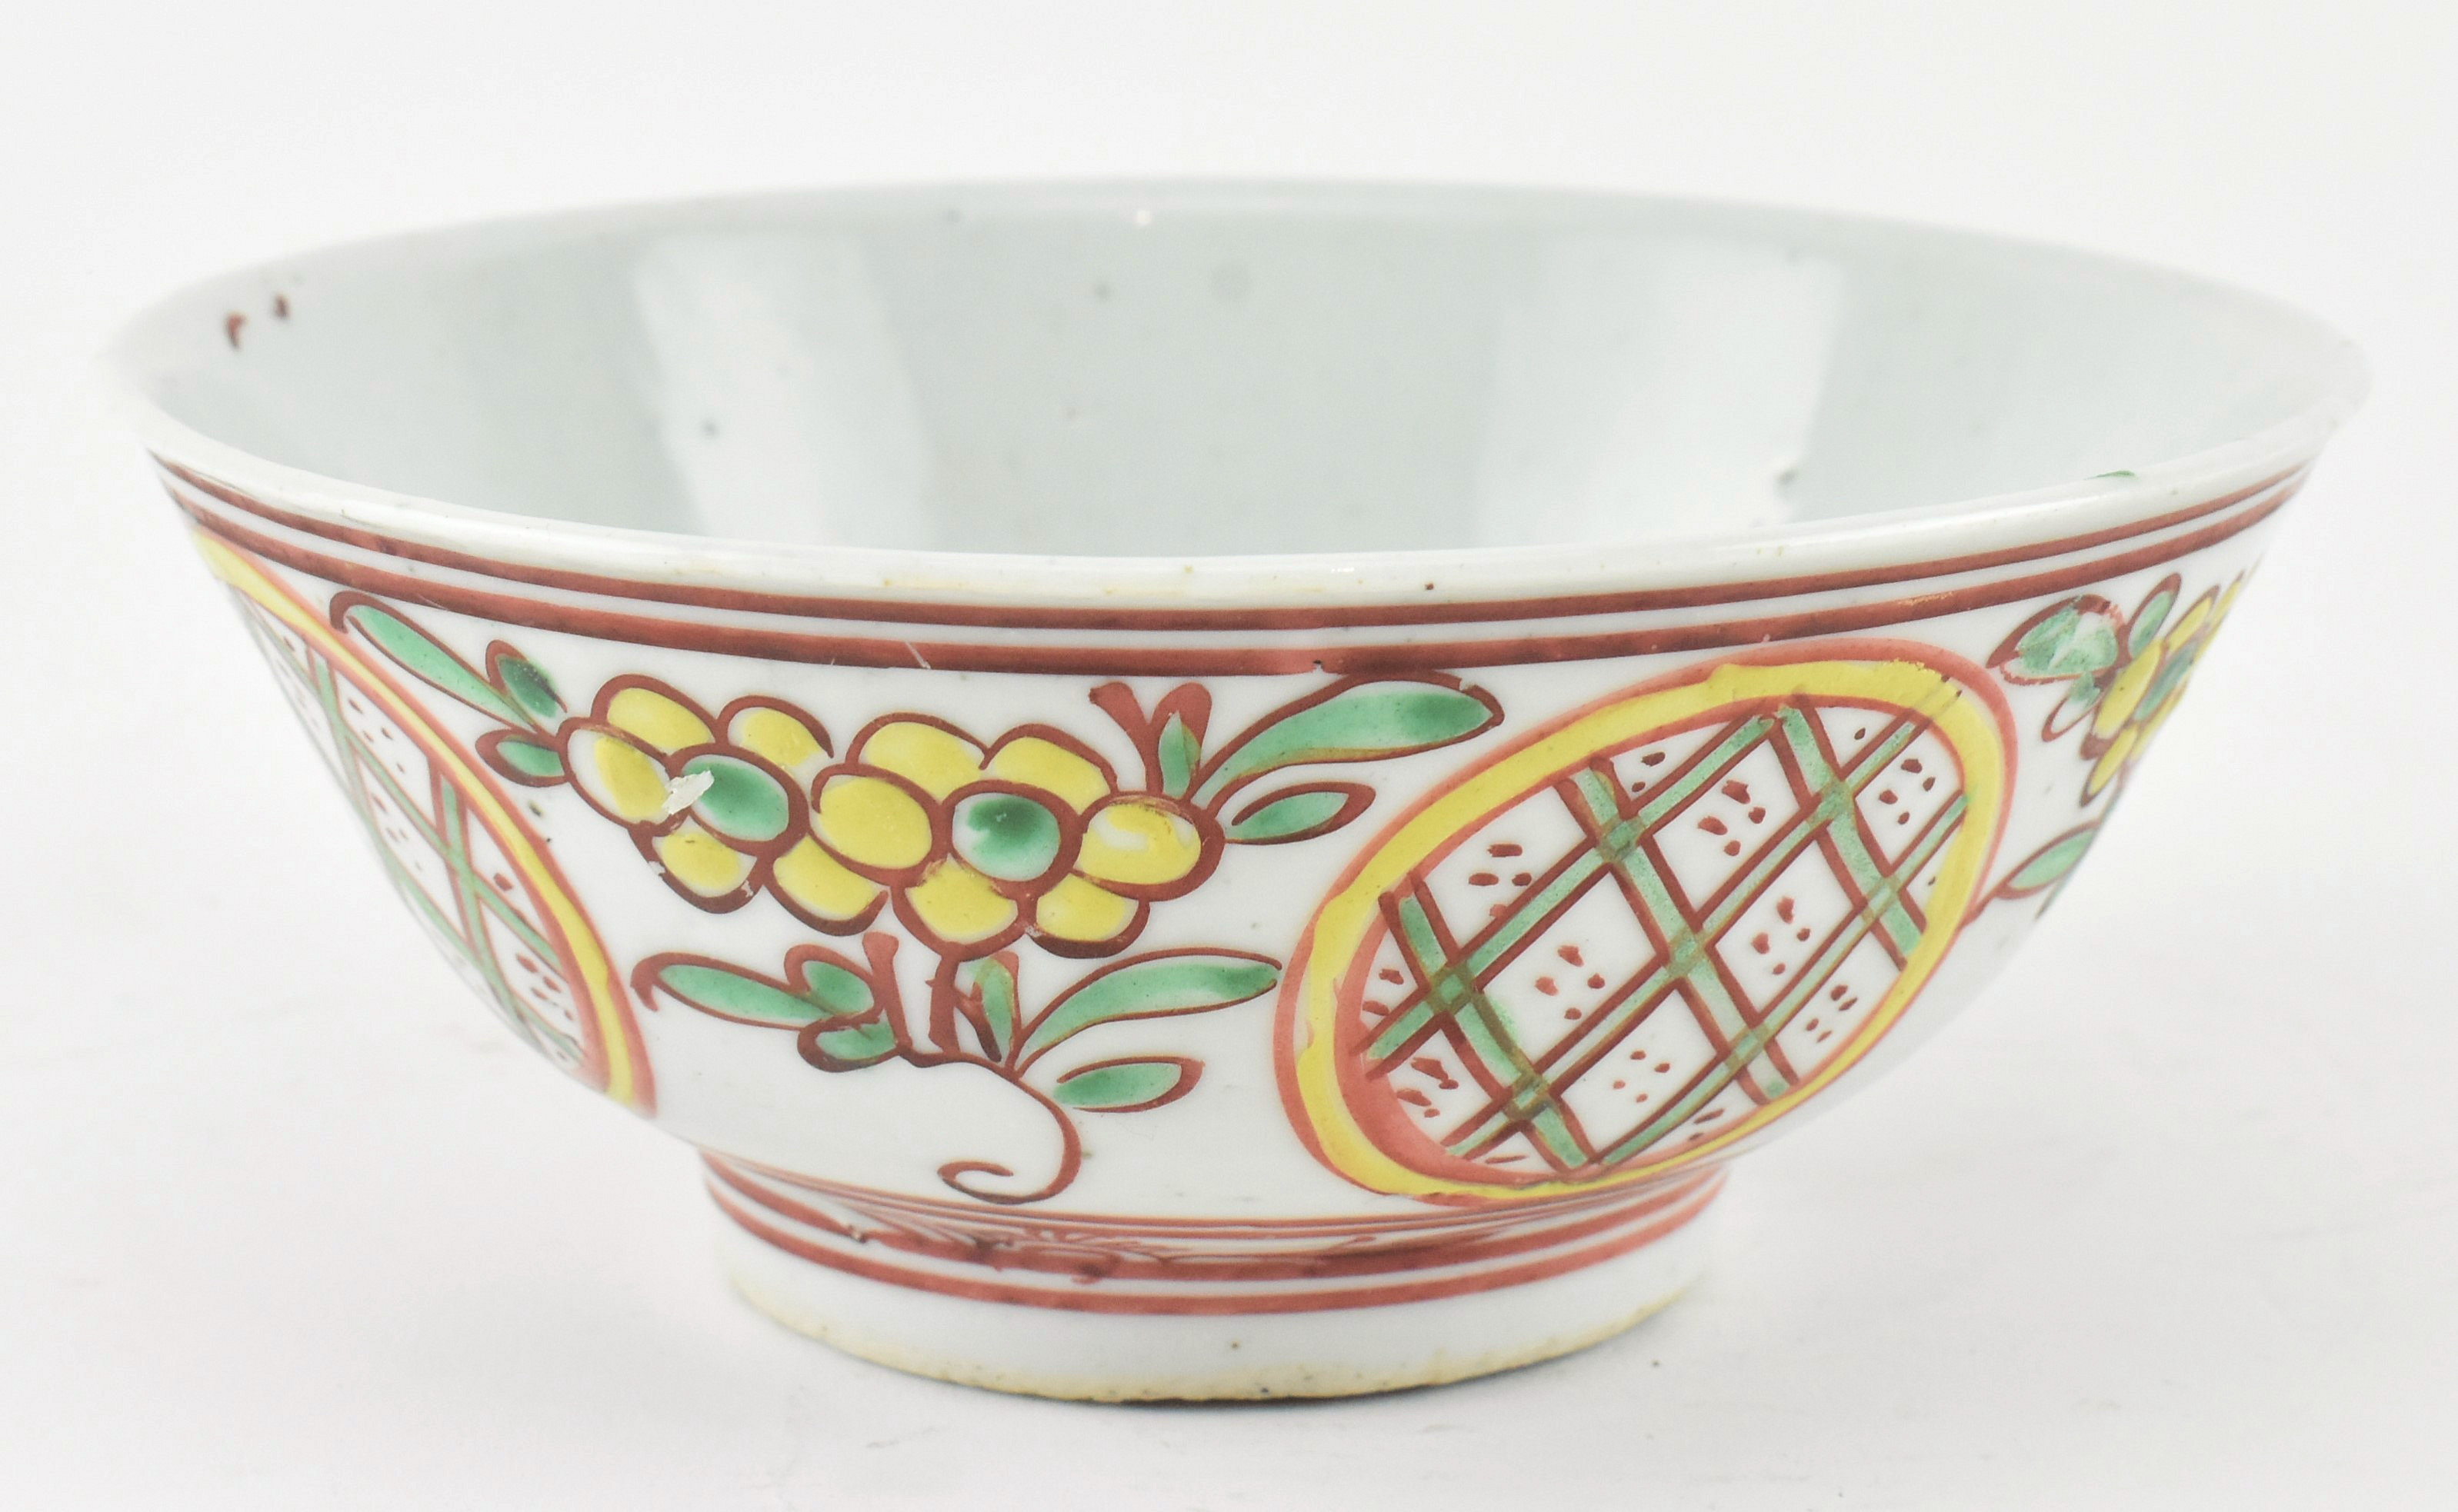 MING OR LATER TRI-COLOURED BOWL 明 红黄绿彩绘碗